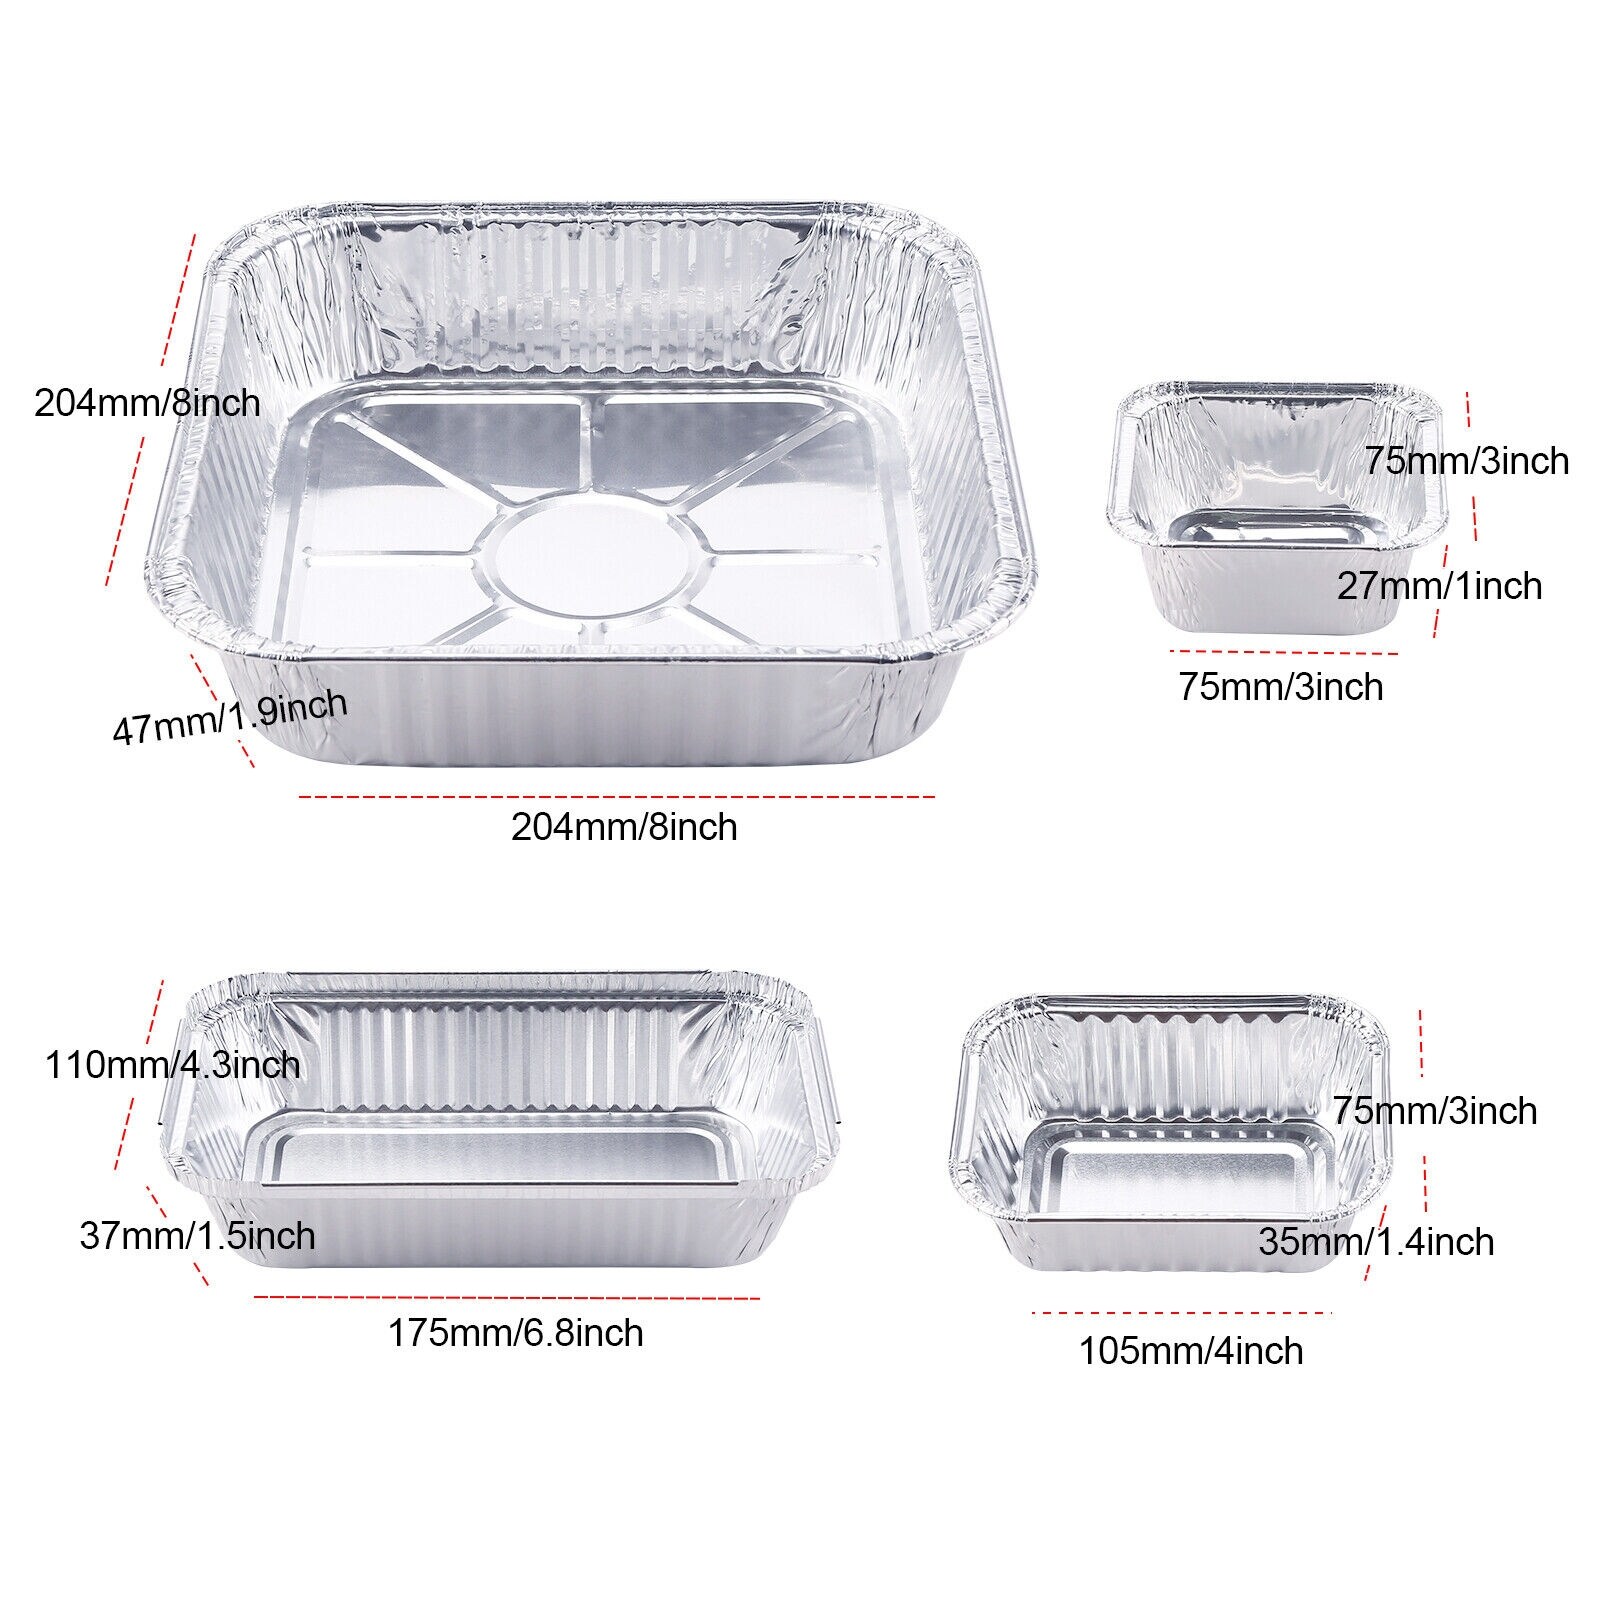 Aluminum Pans Cookie Sheet Baking Pans, Disposable Aluminum Foil Trays  -Durable Nonstick Baking Sheets,for Picnic or Taking Food on A Day Trip.  25PCS 